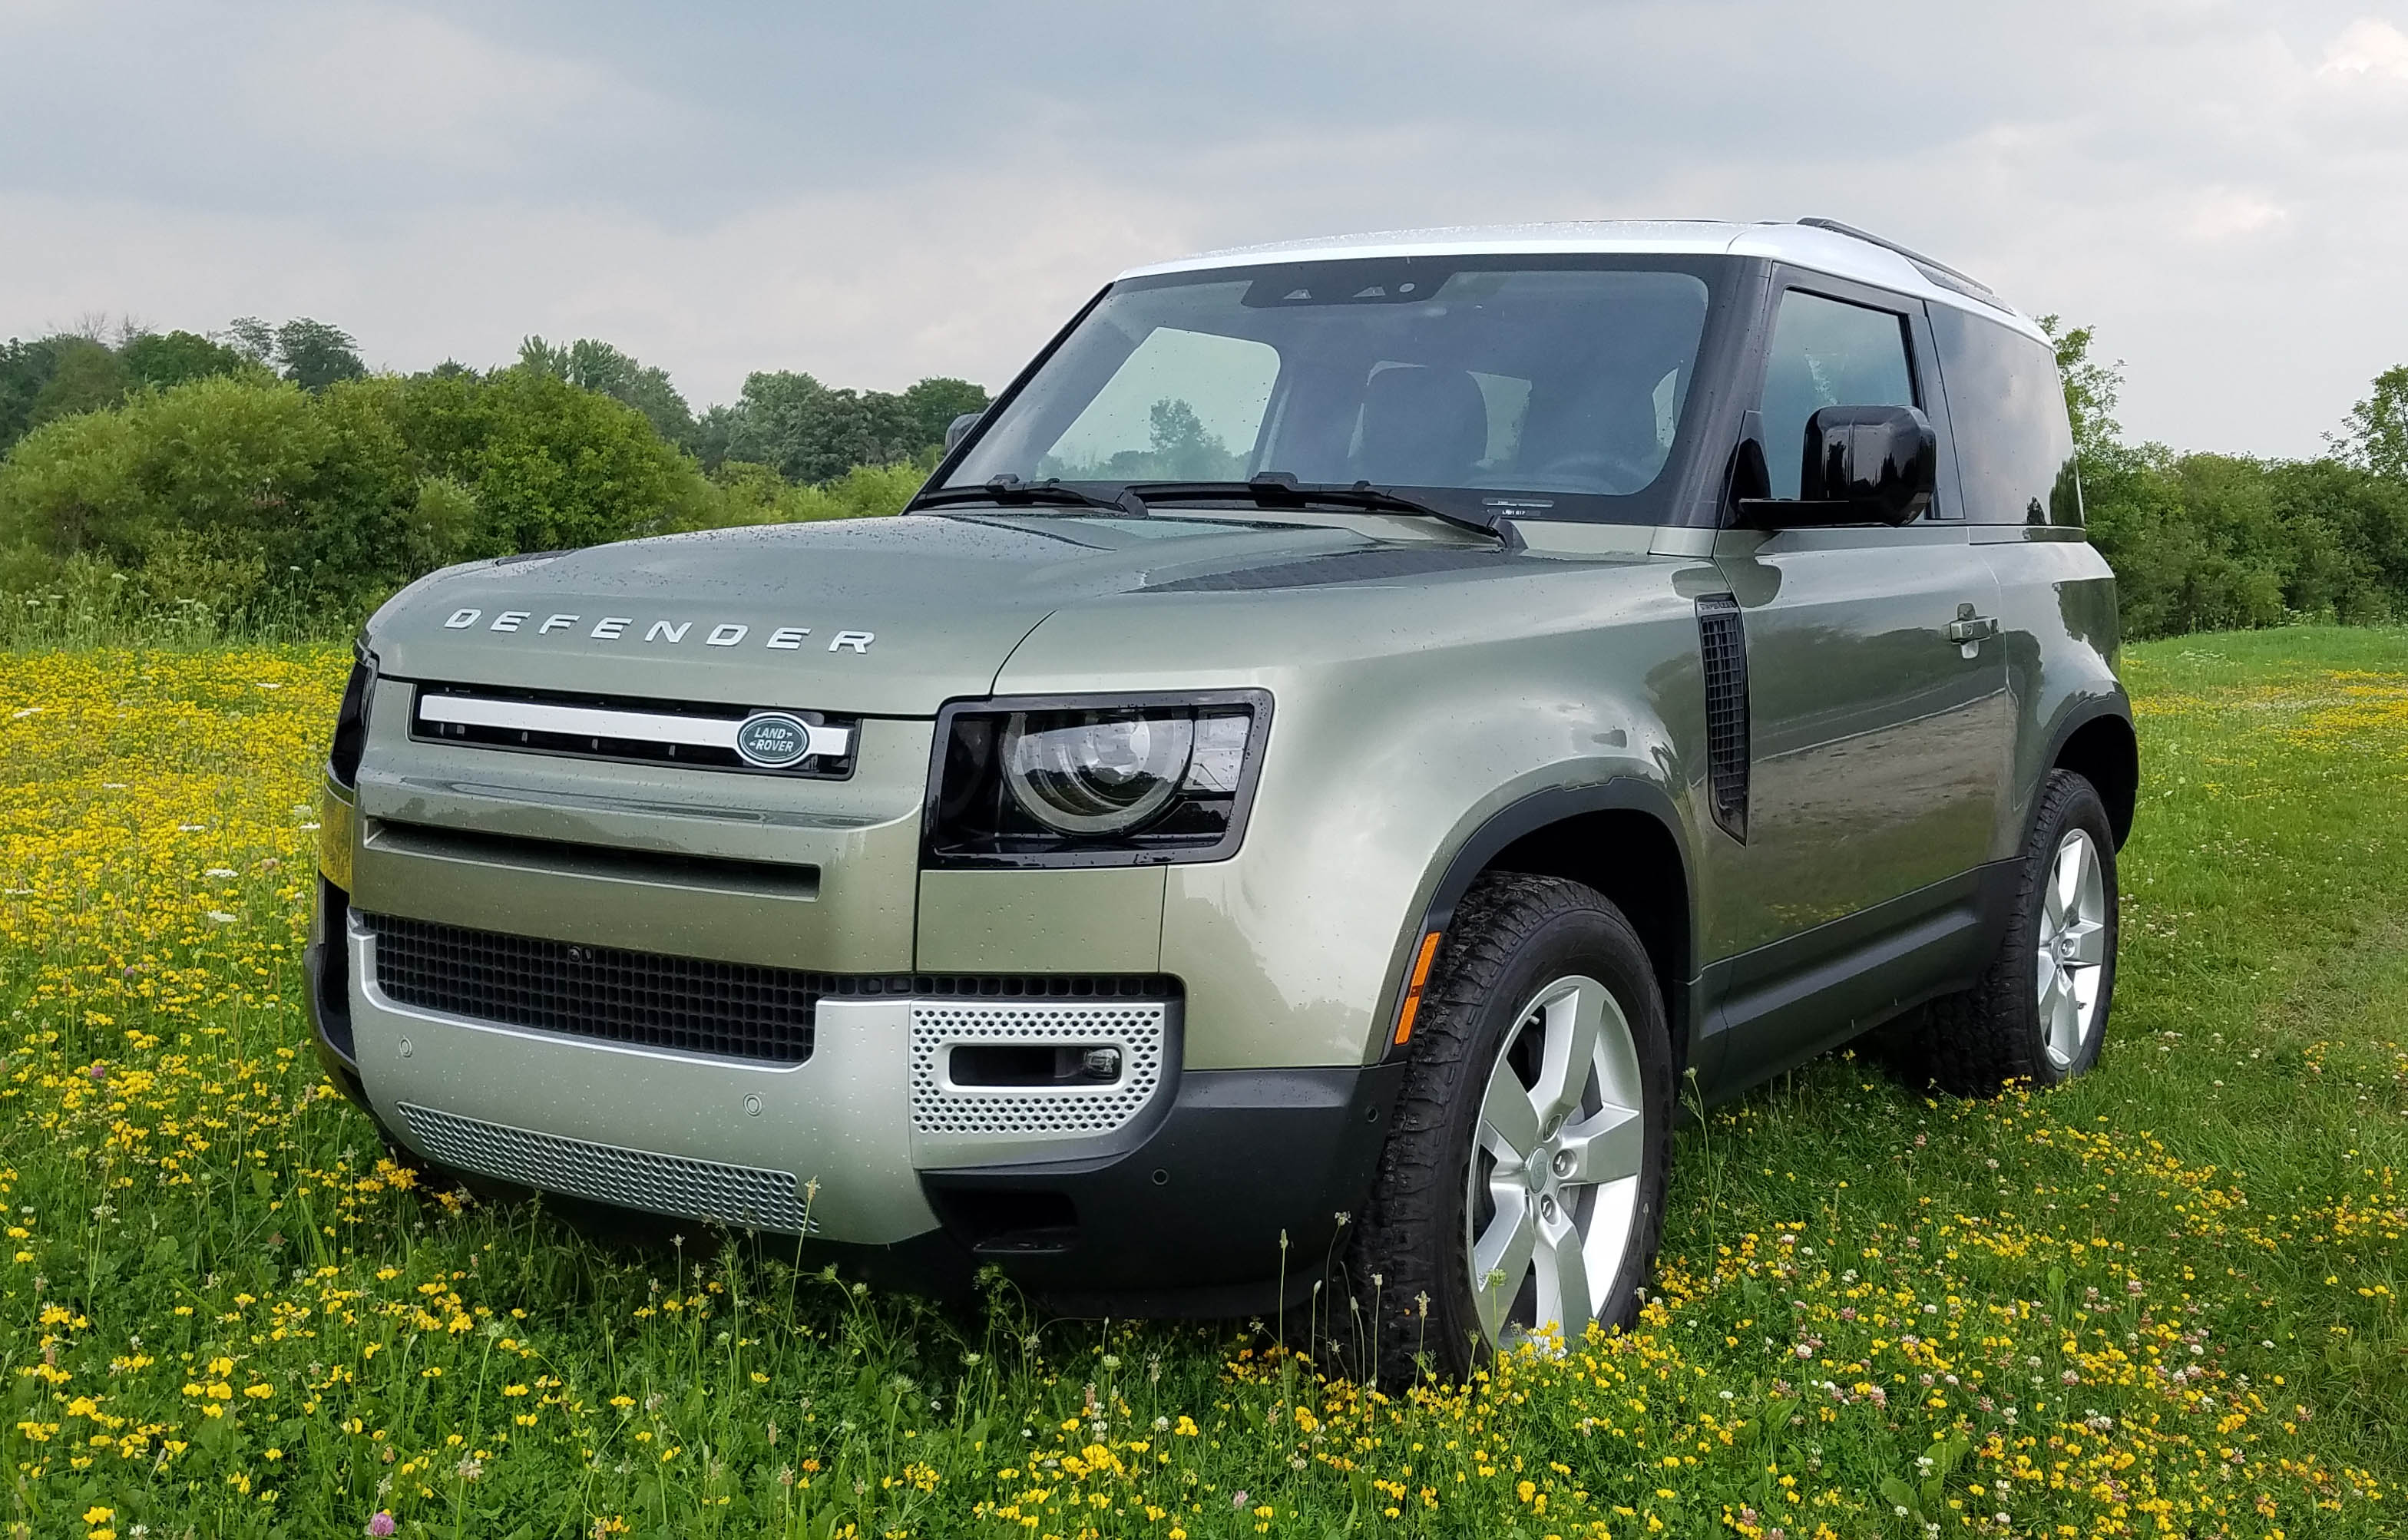 2021 Land Rover Defender 90 First Edition Review | WUWM 89.7 FM -  Milwaukee's NPR